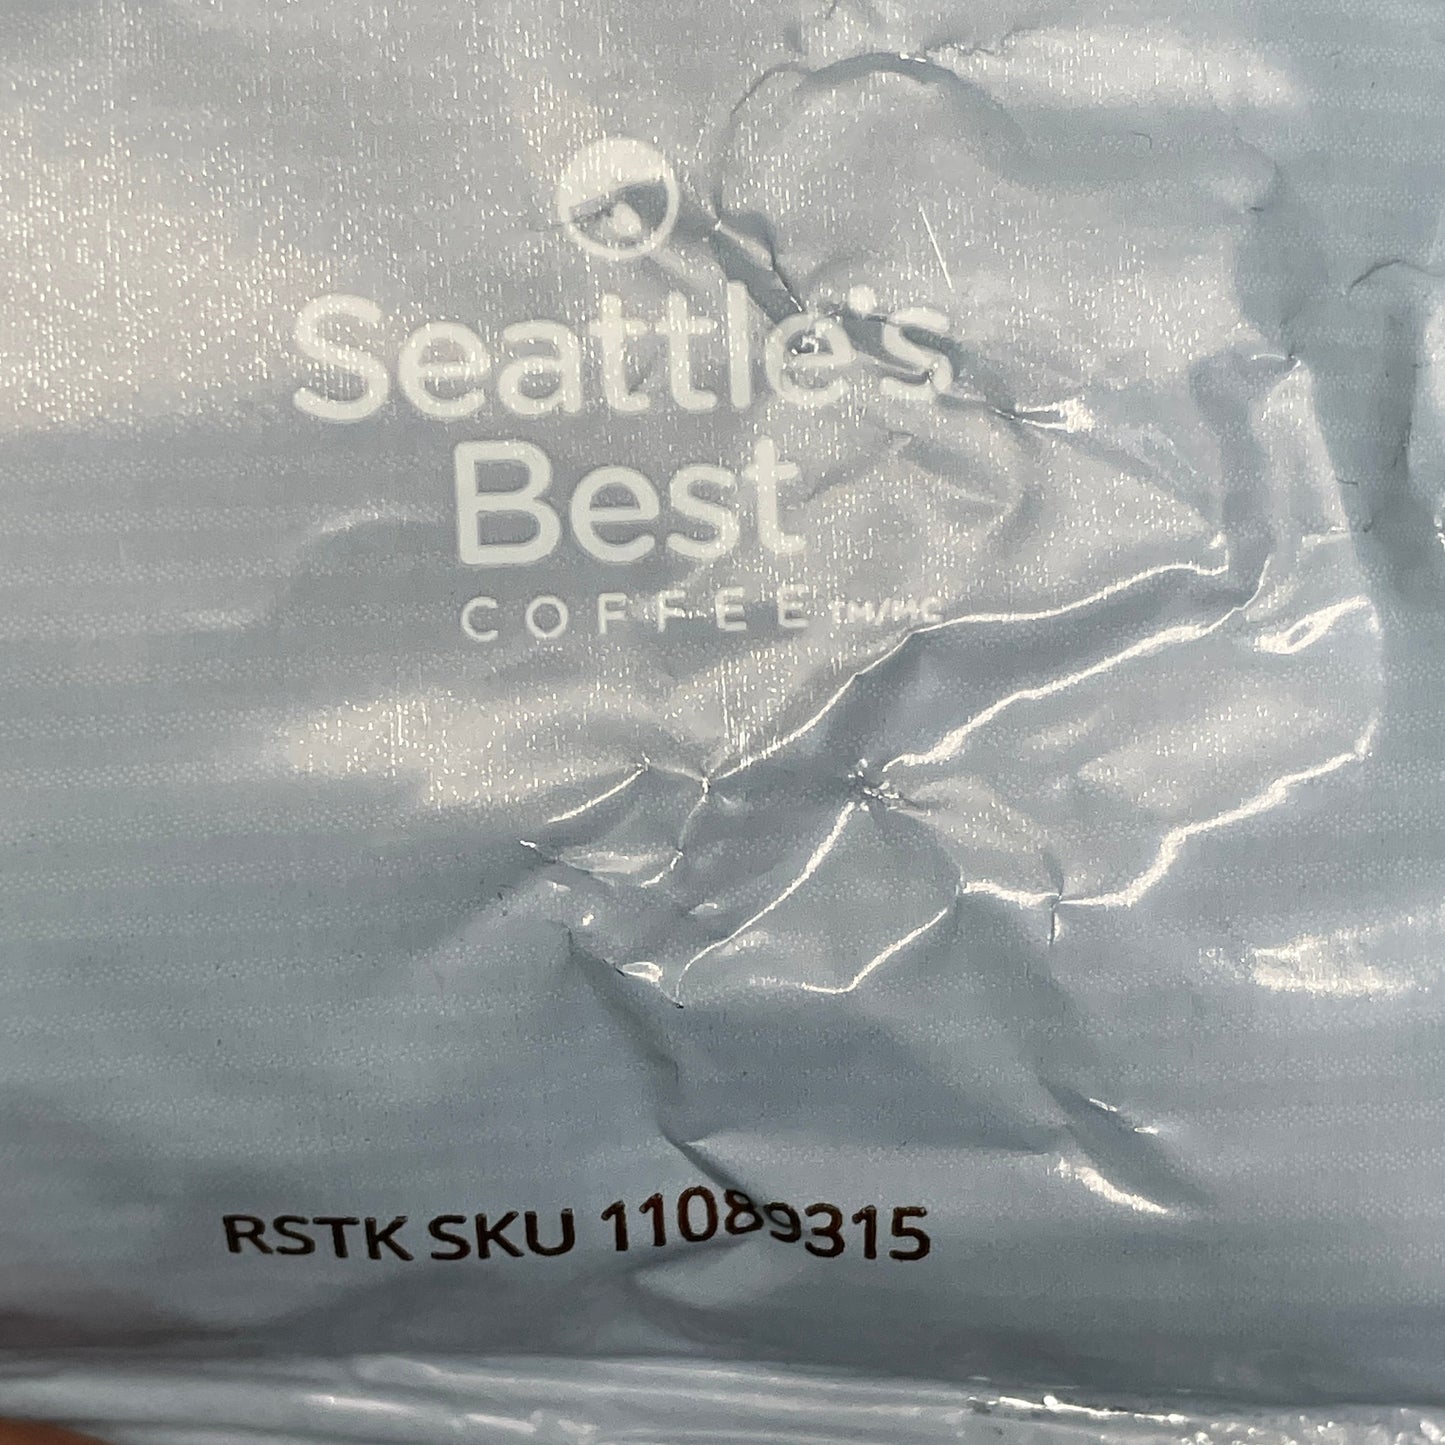 ZA@ SEATTLES BEST COFFEE LOT OF 10-6 oz Decaf Portside Blend Ground Coffee Bags BB 11/23 (New AS-IS) G